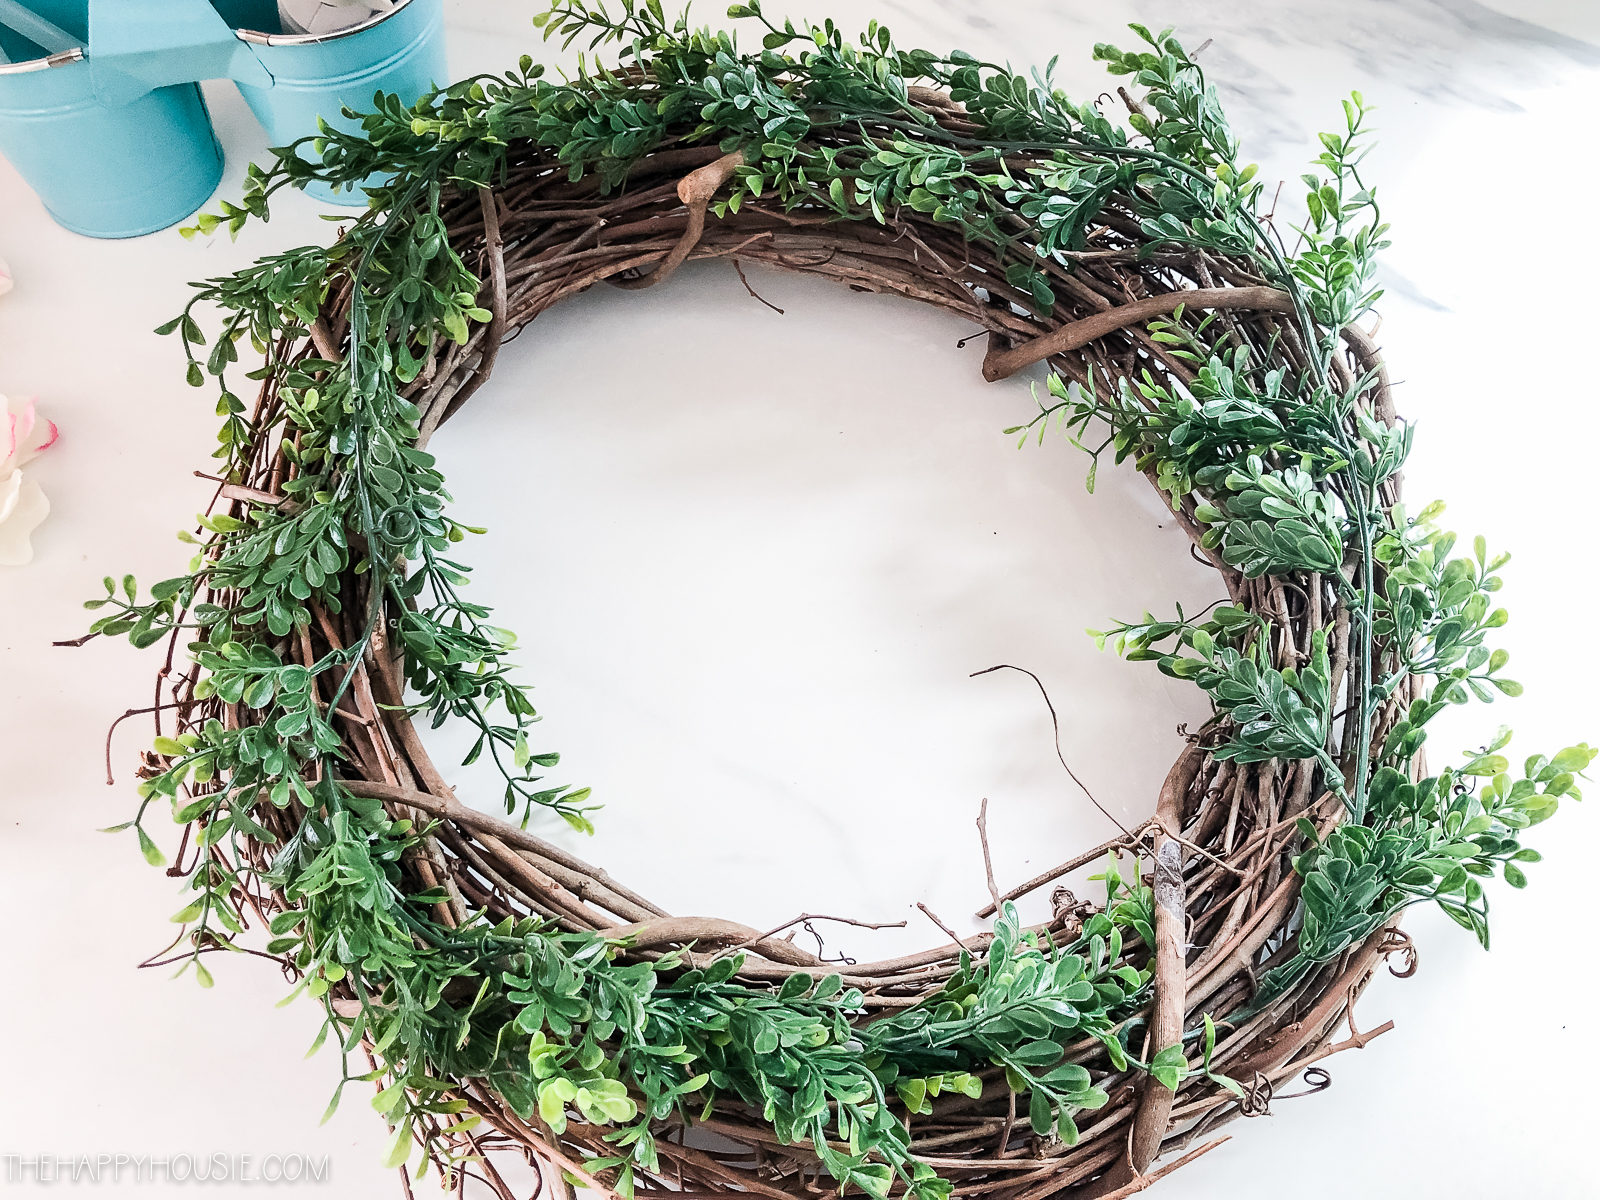 The wreath with greenery on it on the table.